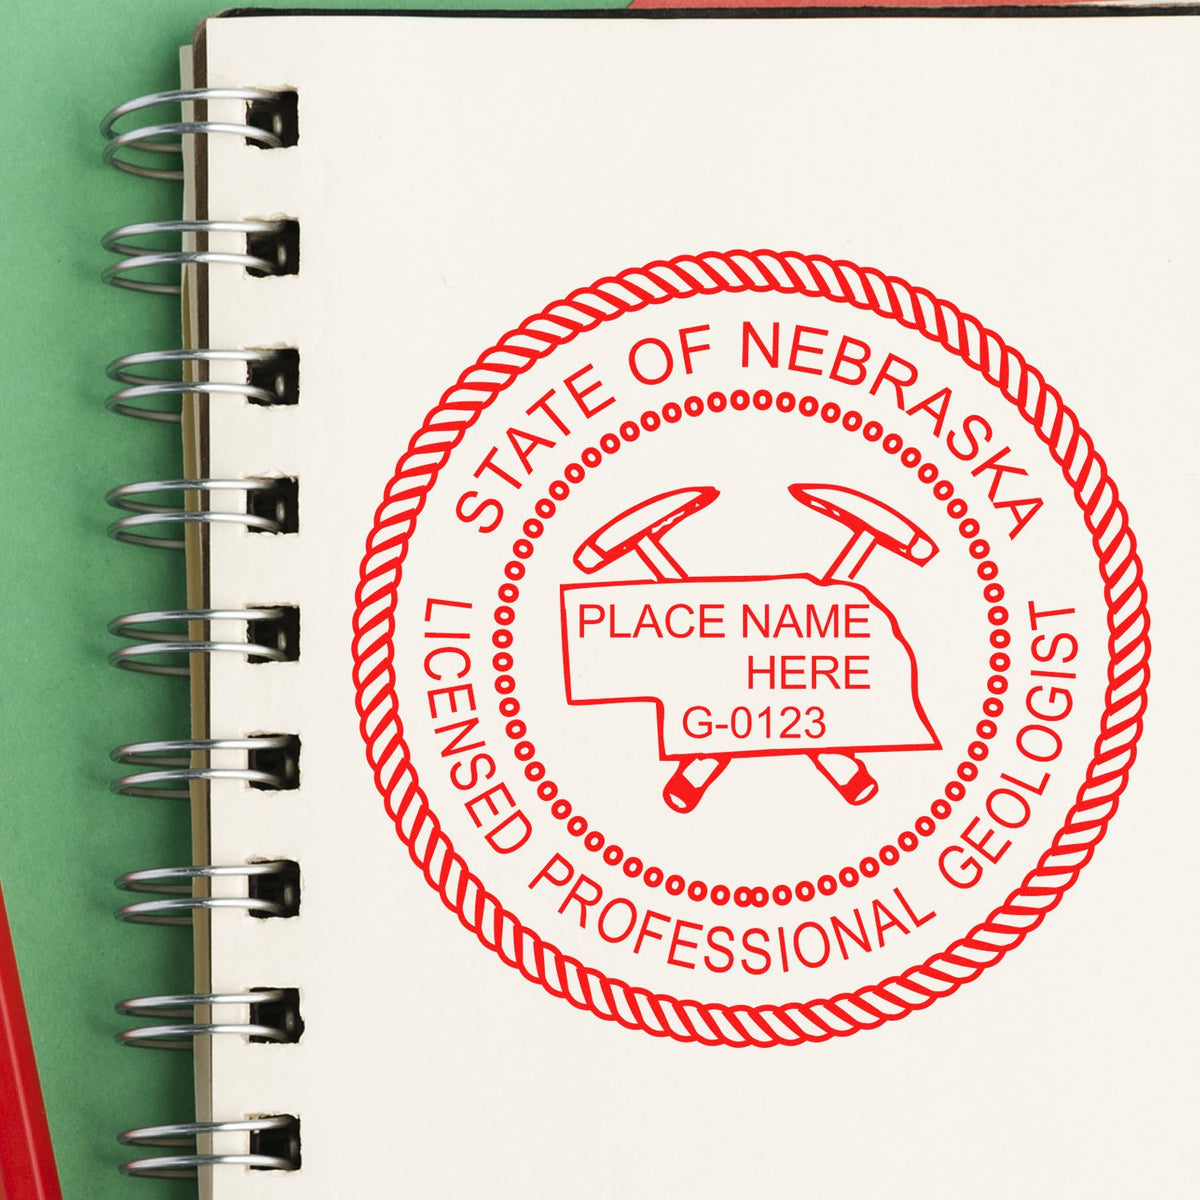 An in use photo of the Digital Nebraska Geologist Stamp, Electronic Seal for Nebraska Geologist showing a sample imprint on a cardstock